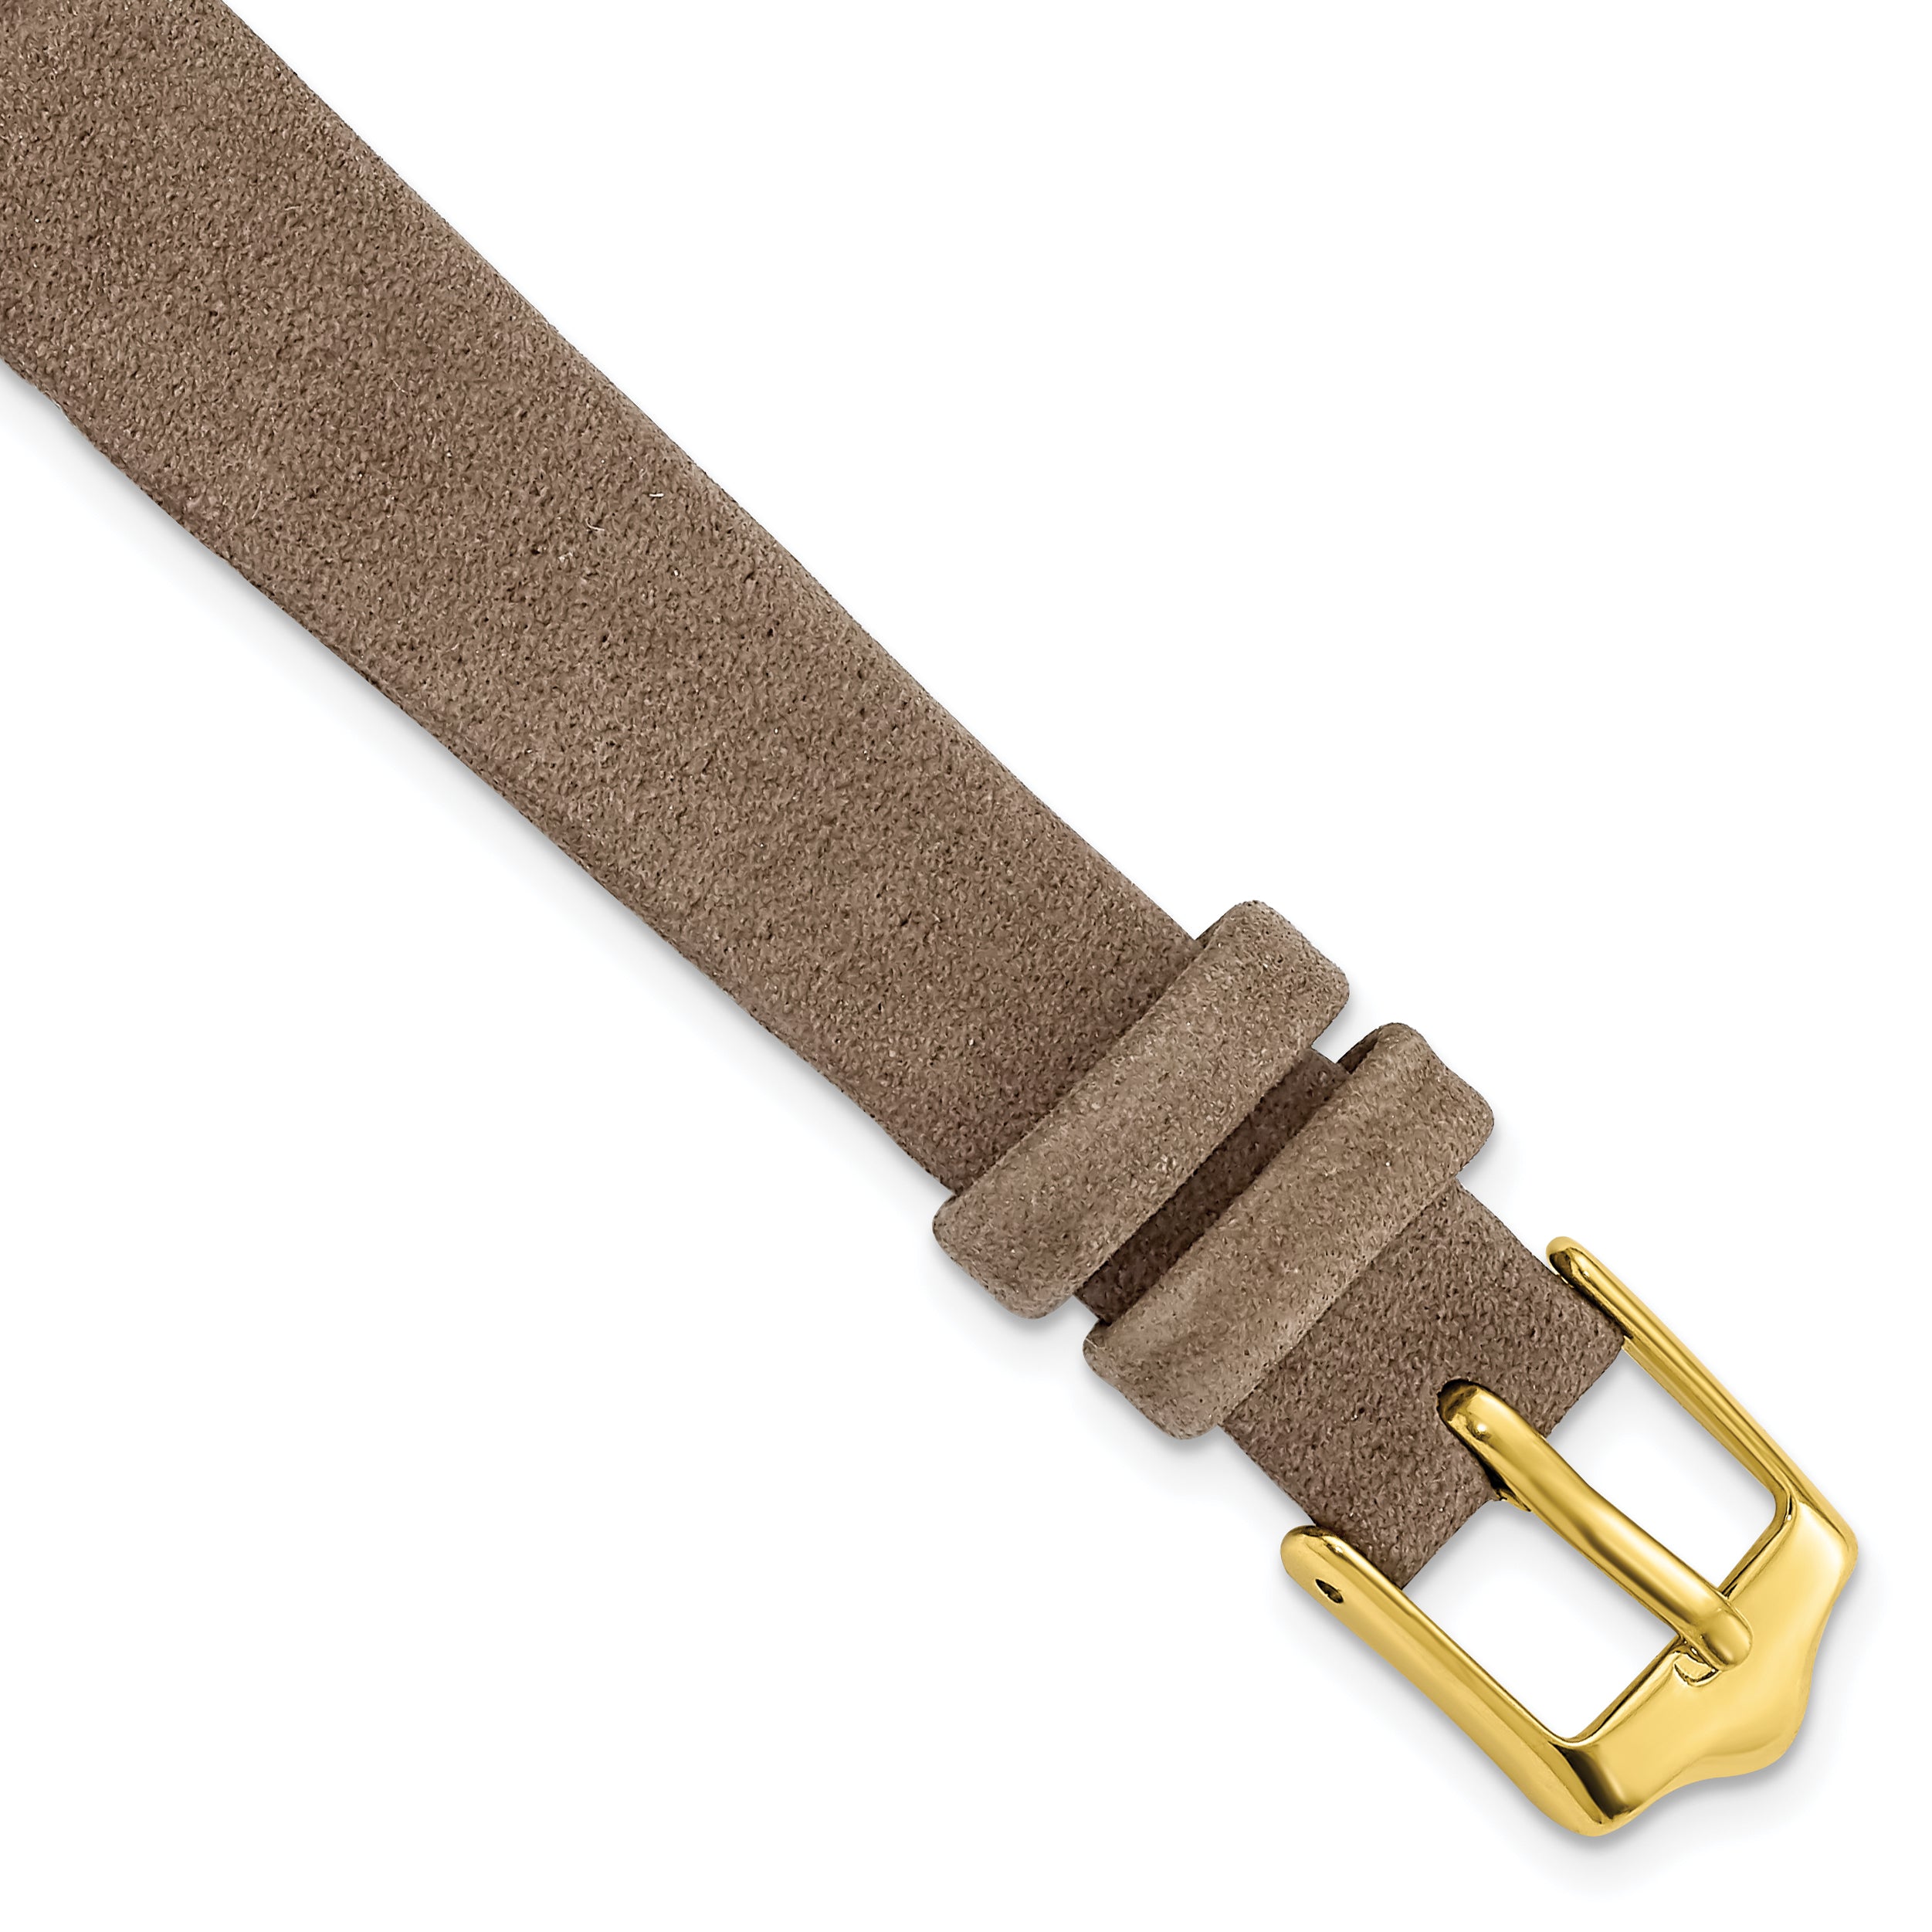 DeBeer 12mm Dark Brown Suede Flat Leather with Gold-tone Buckle 6.75 inch Watch Band